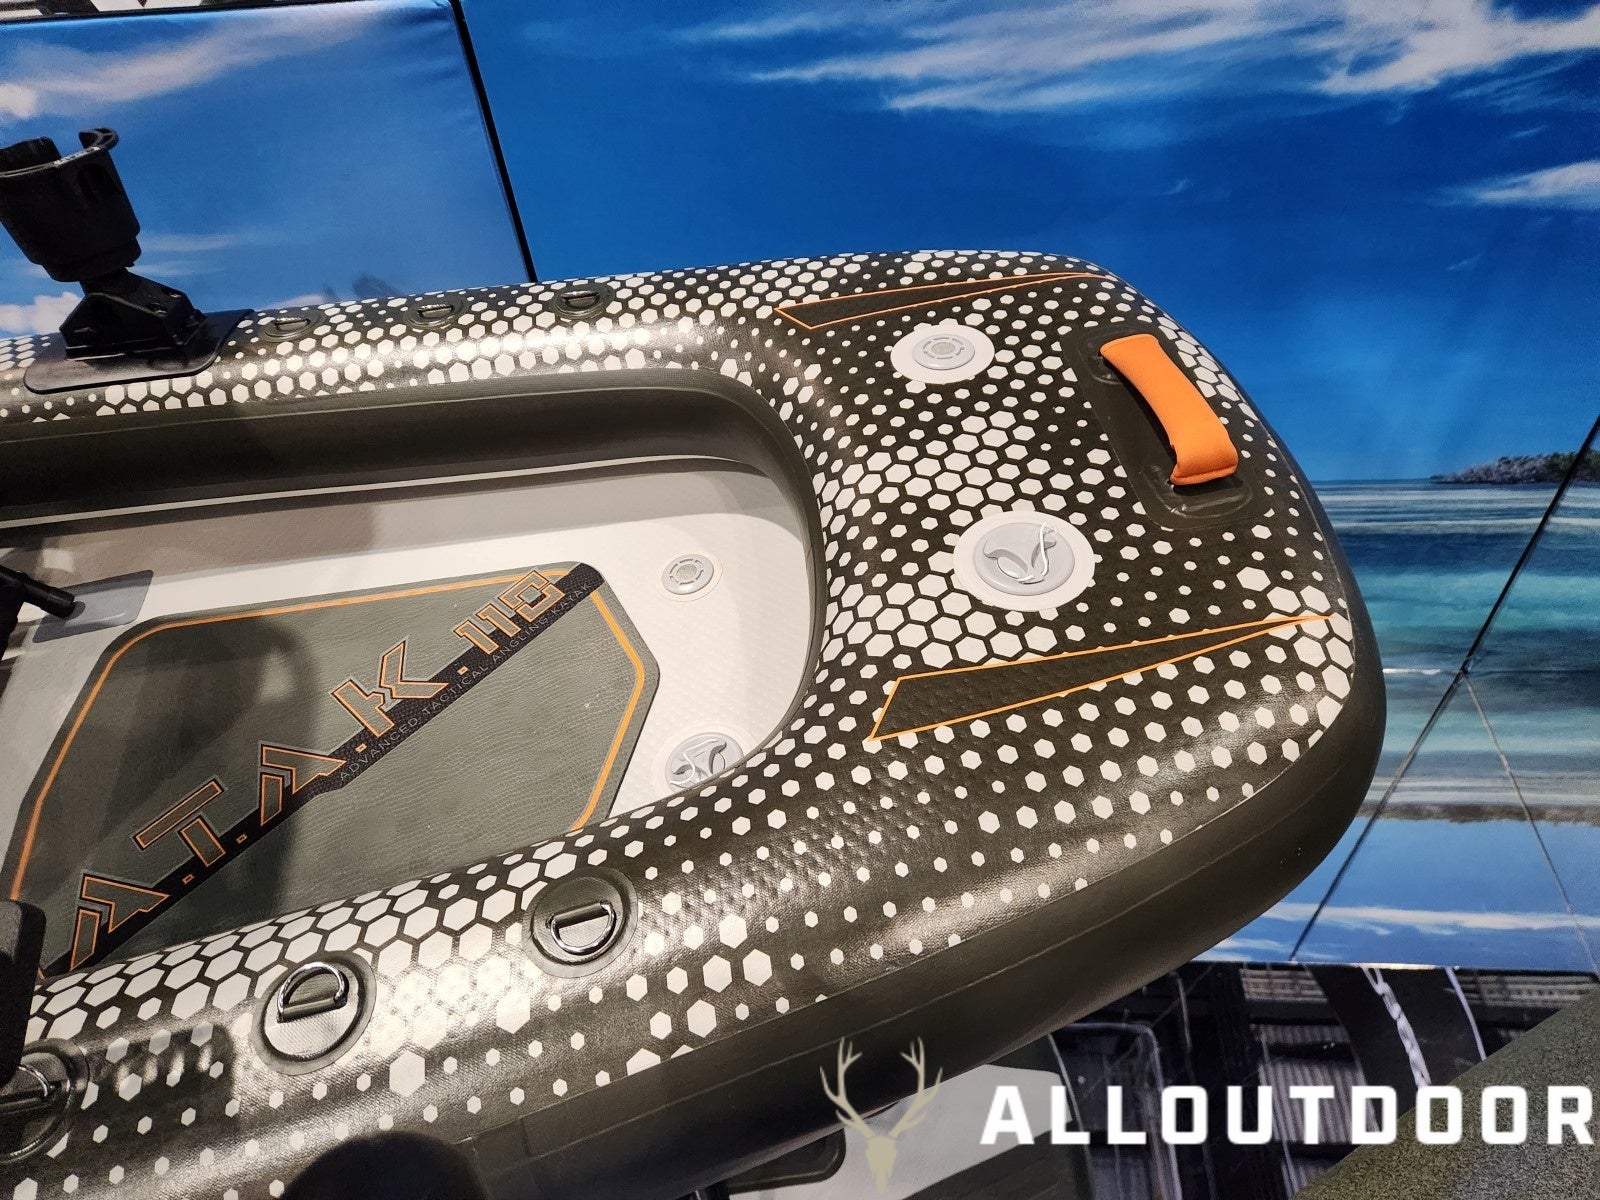 [ICAST 2023]The iA.T.A.K 110 Angler Kayak from Pelican International